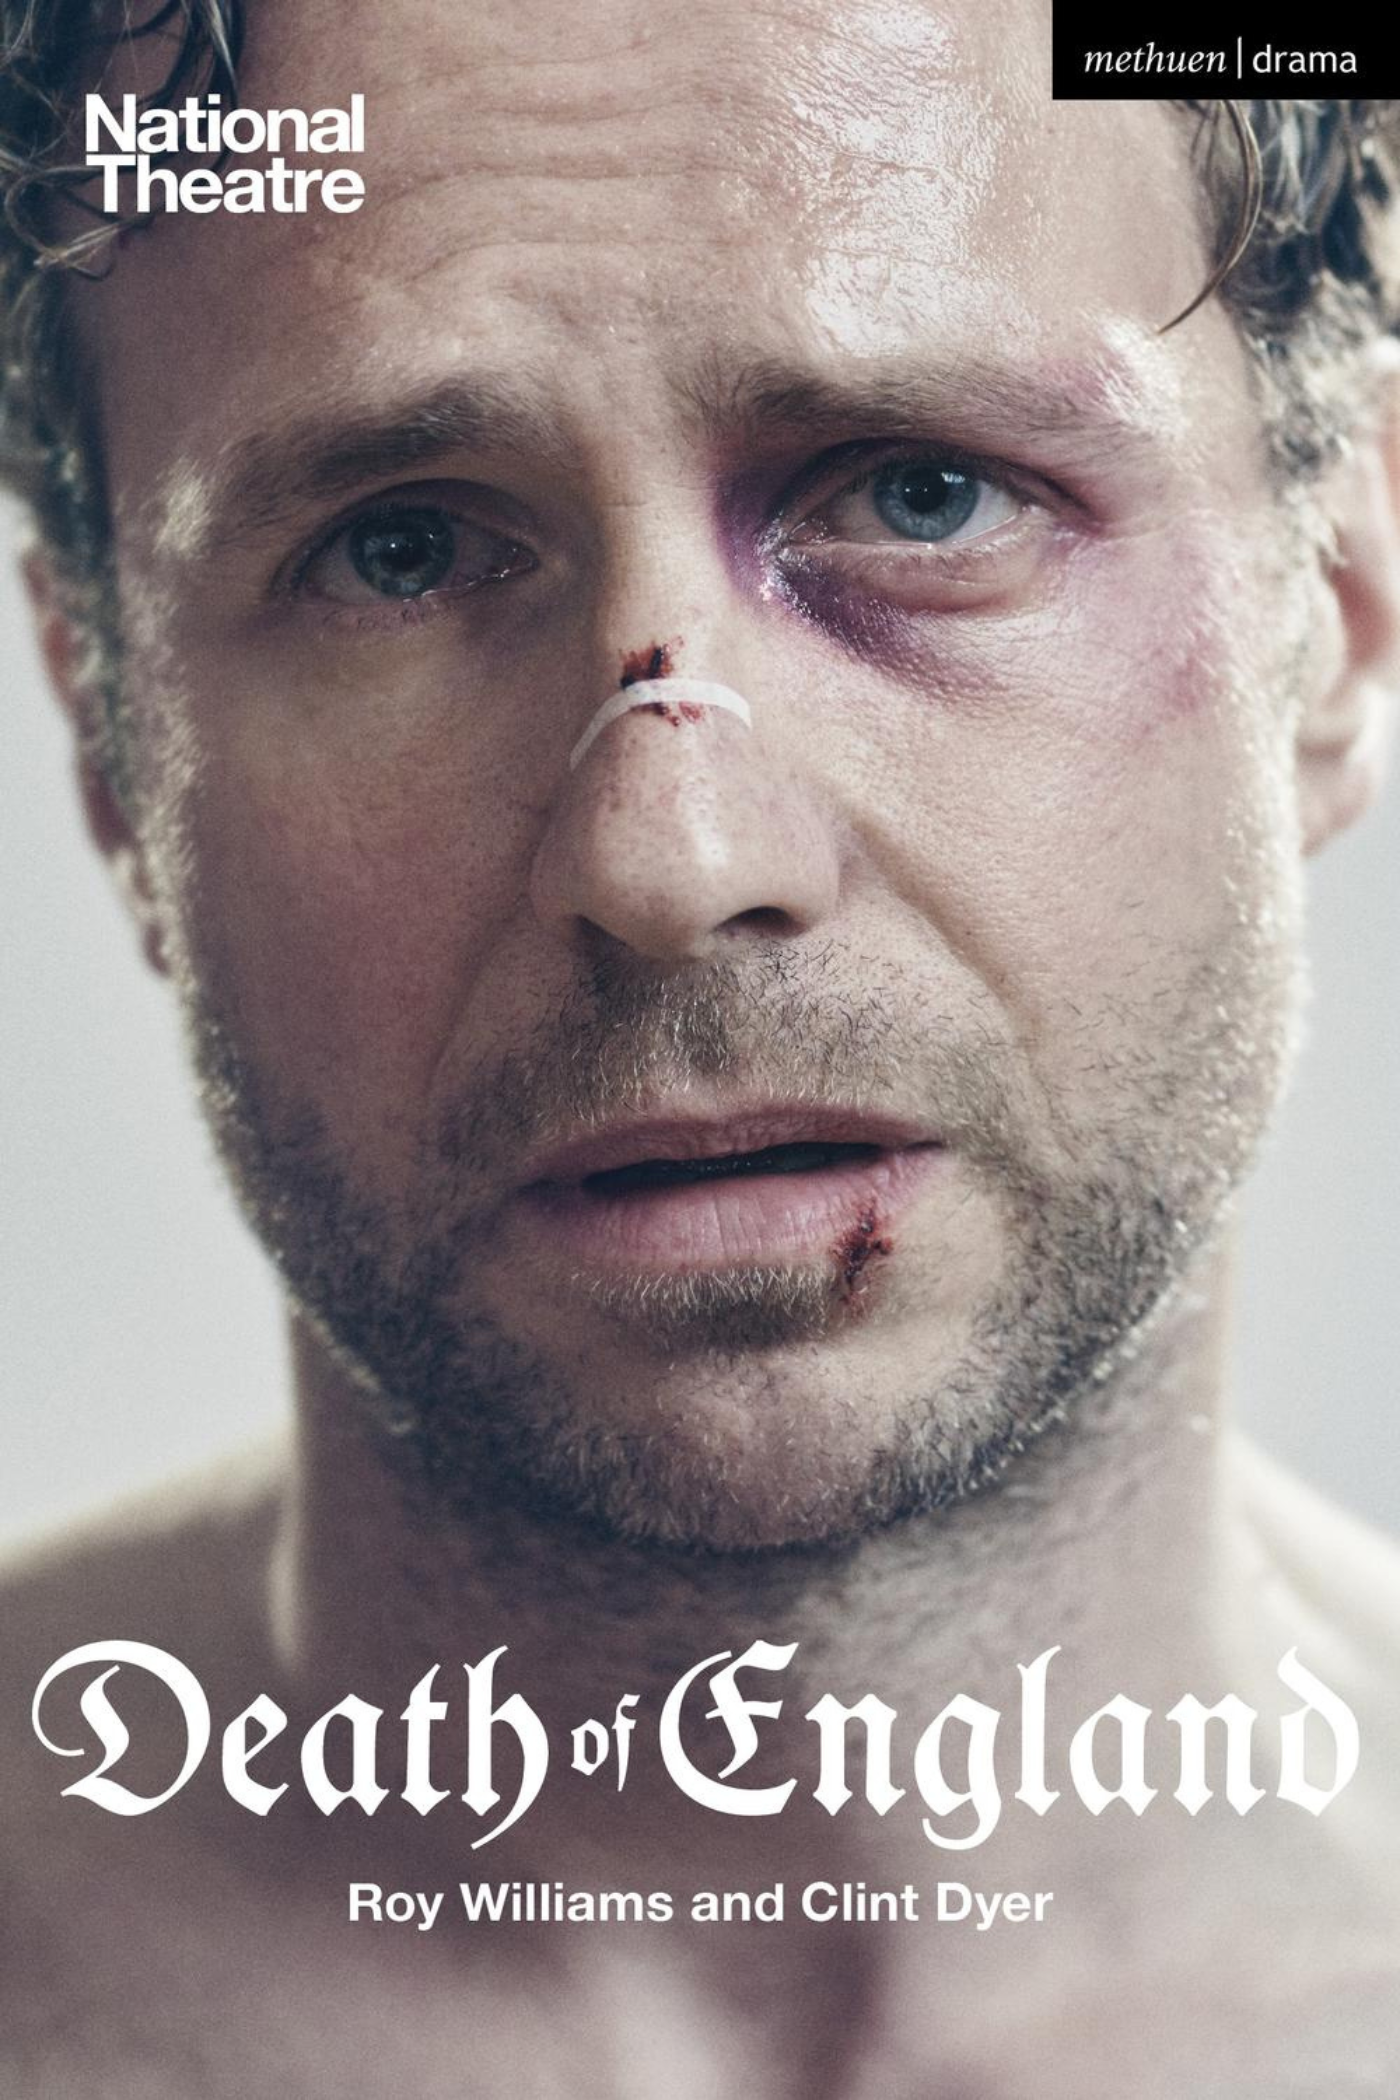 Roy Williams, Death of England Poster.png